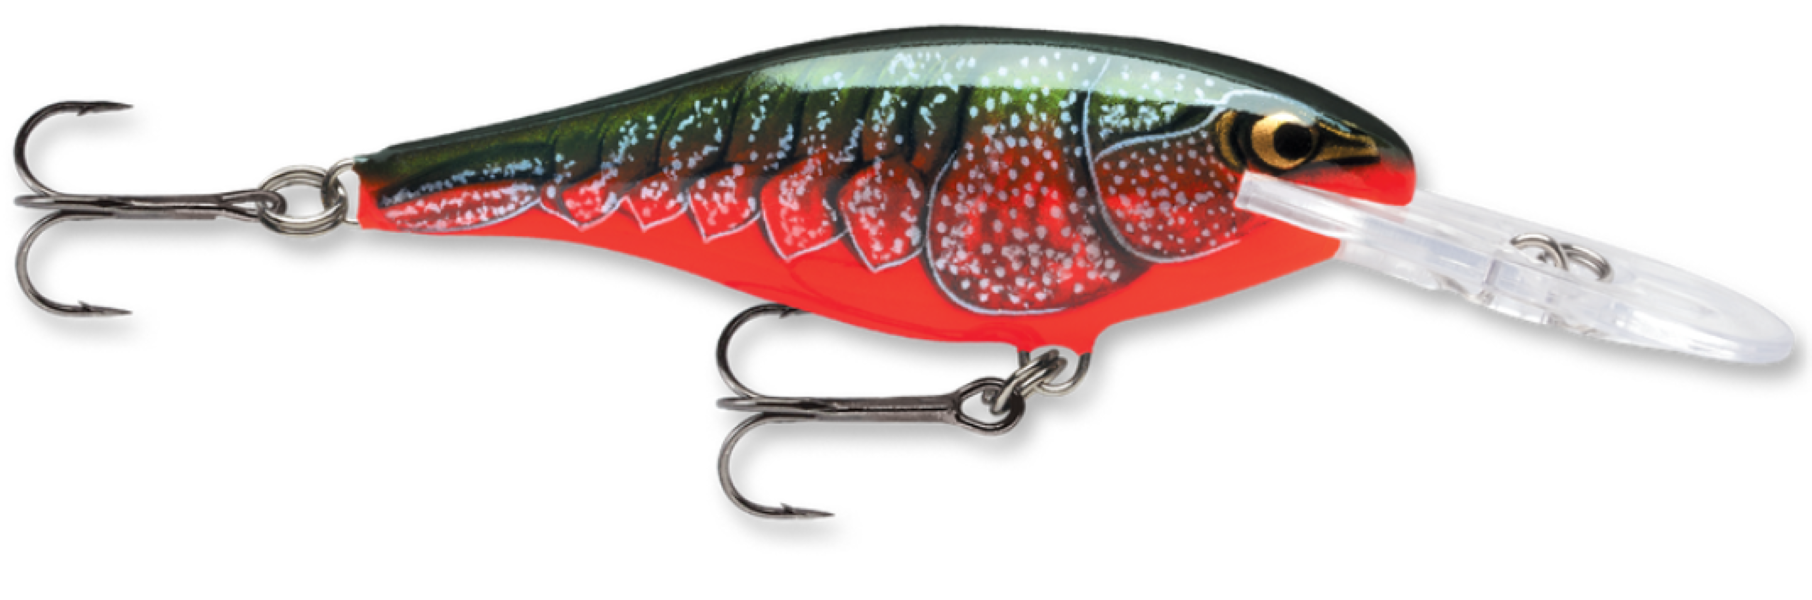  EliasVFishing Mackinaw Shad Series - Ocean Jigging, Lake  Trout, Weakfish, Striped Bass, Redfish Lure (2 Pack) (Black Red Chartreuse)  : Sports & Outdoors